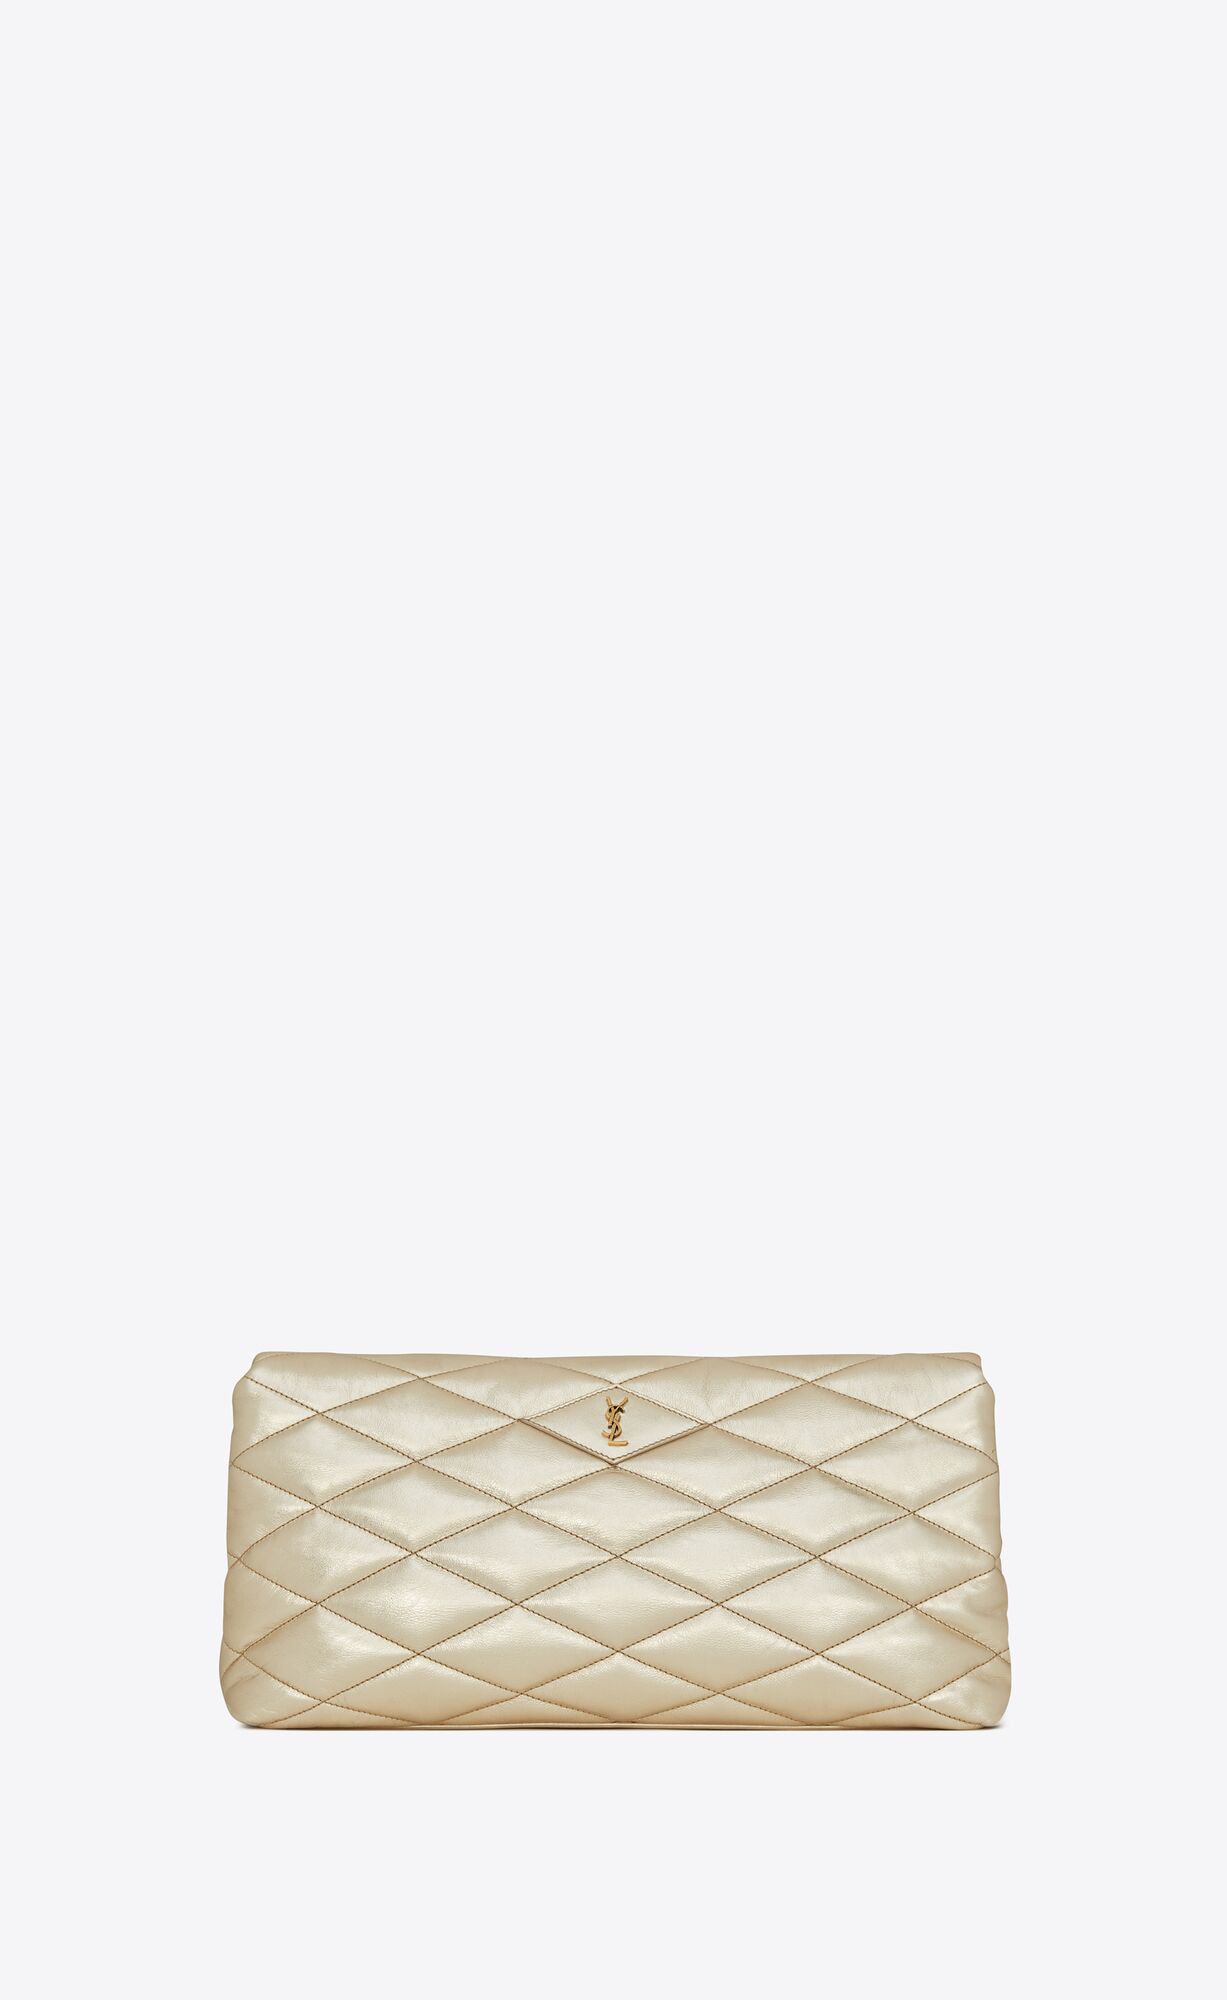 Saint Laurent Sade Large Clutch In Lamé Leather – Pale Gold – 655004AAAAO7100